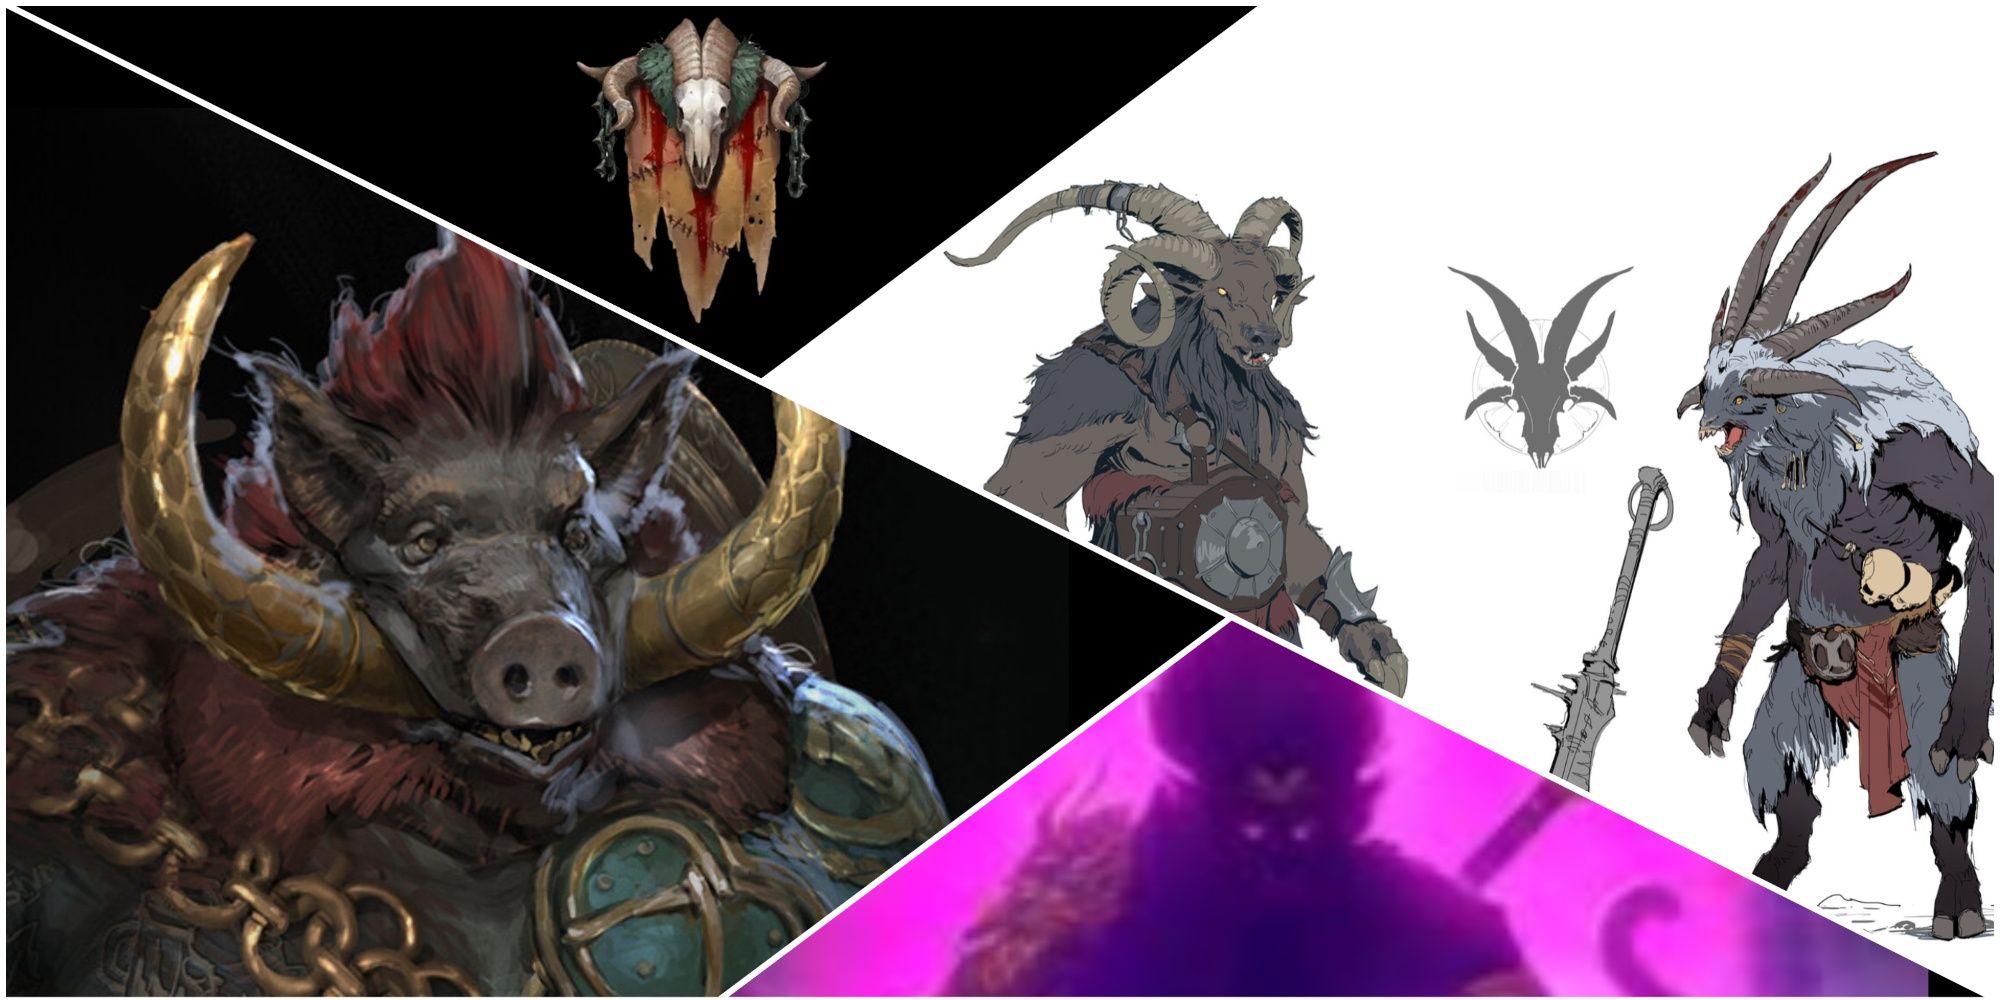 Skinwalker Champions Mighty Ukko and Sun Wukong as well as some concept art of Skinwalkers surround a faction banner.